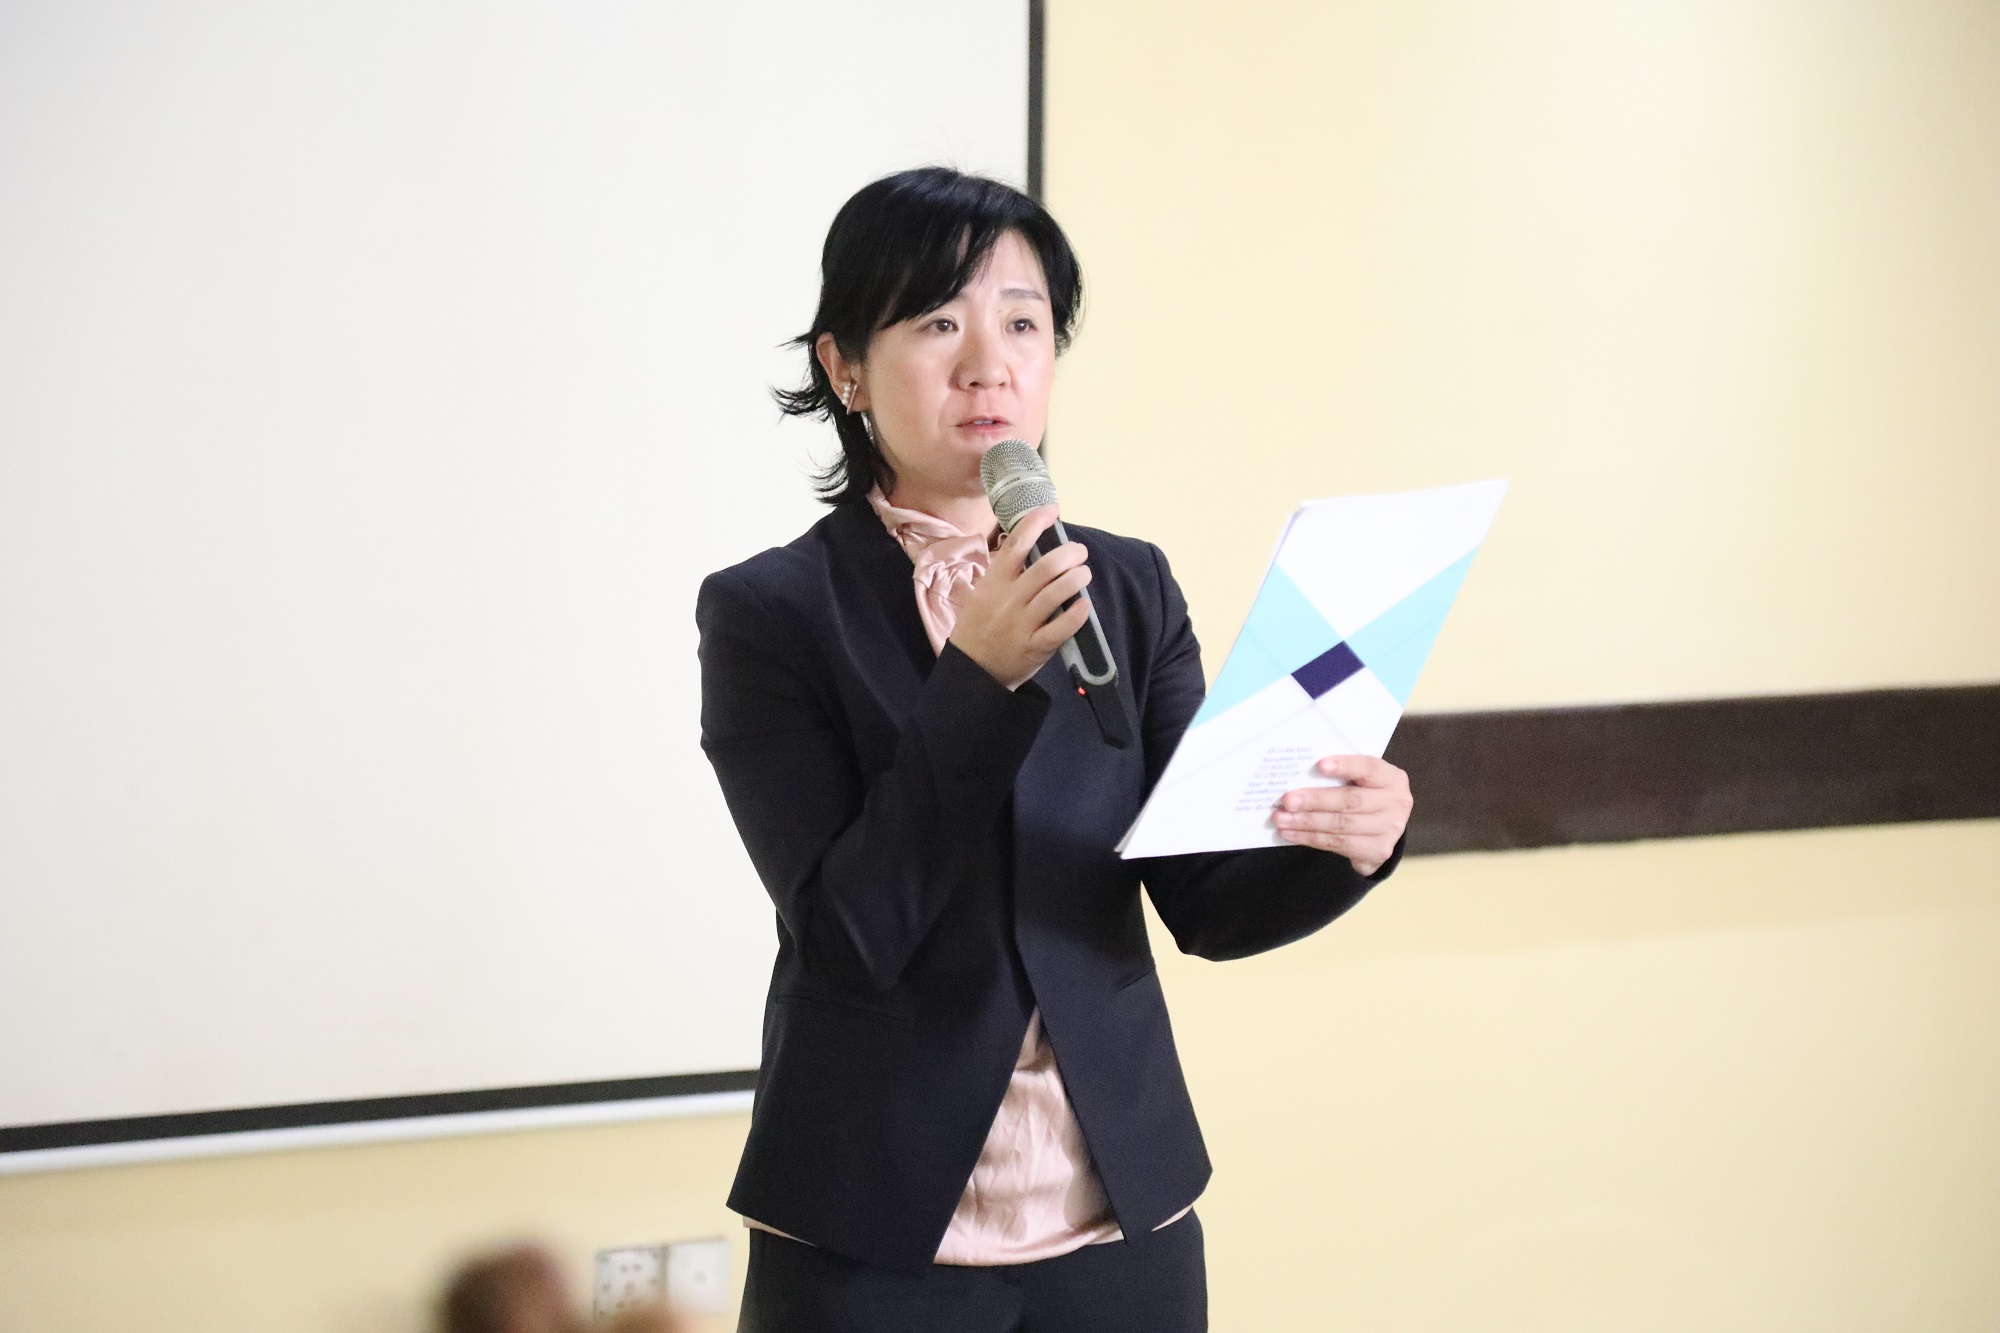 Ms Kaori Yasuda, IUCN Rwanda Country Representative thanked the participants for their continued efforts